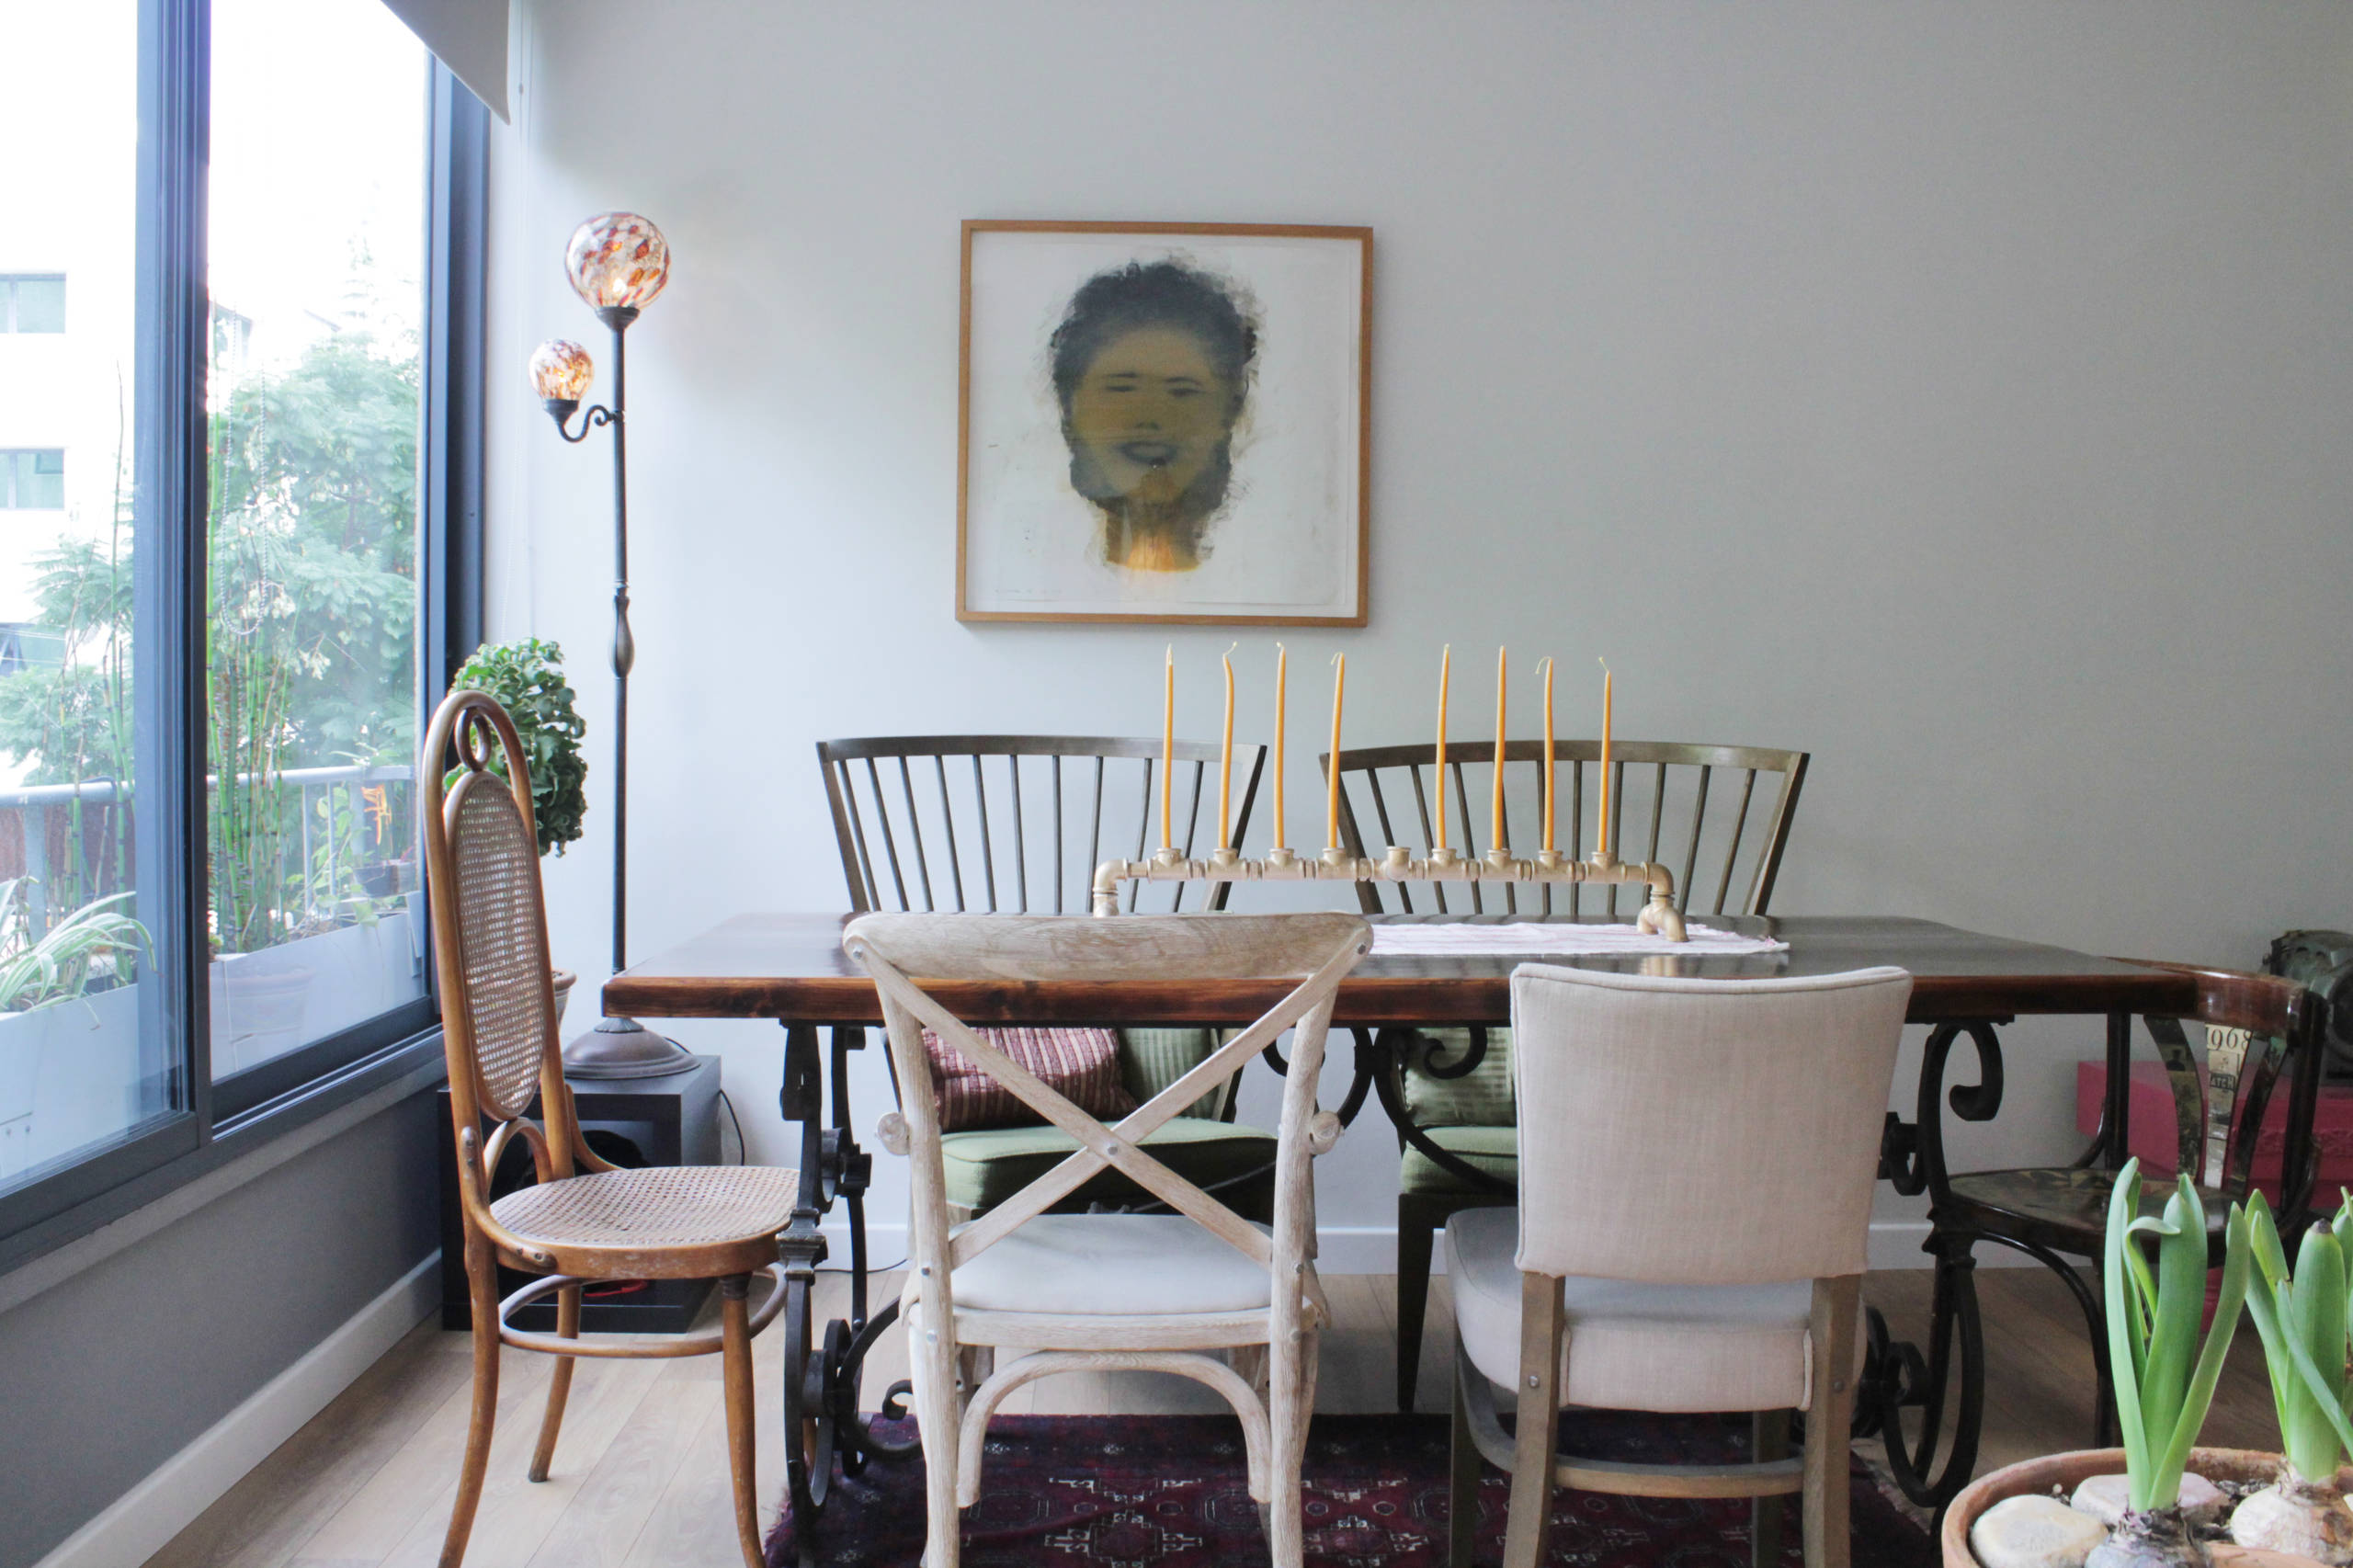 Mismatched Dining Chairs - Photos & Ideas | Houzz